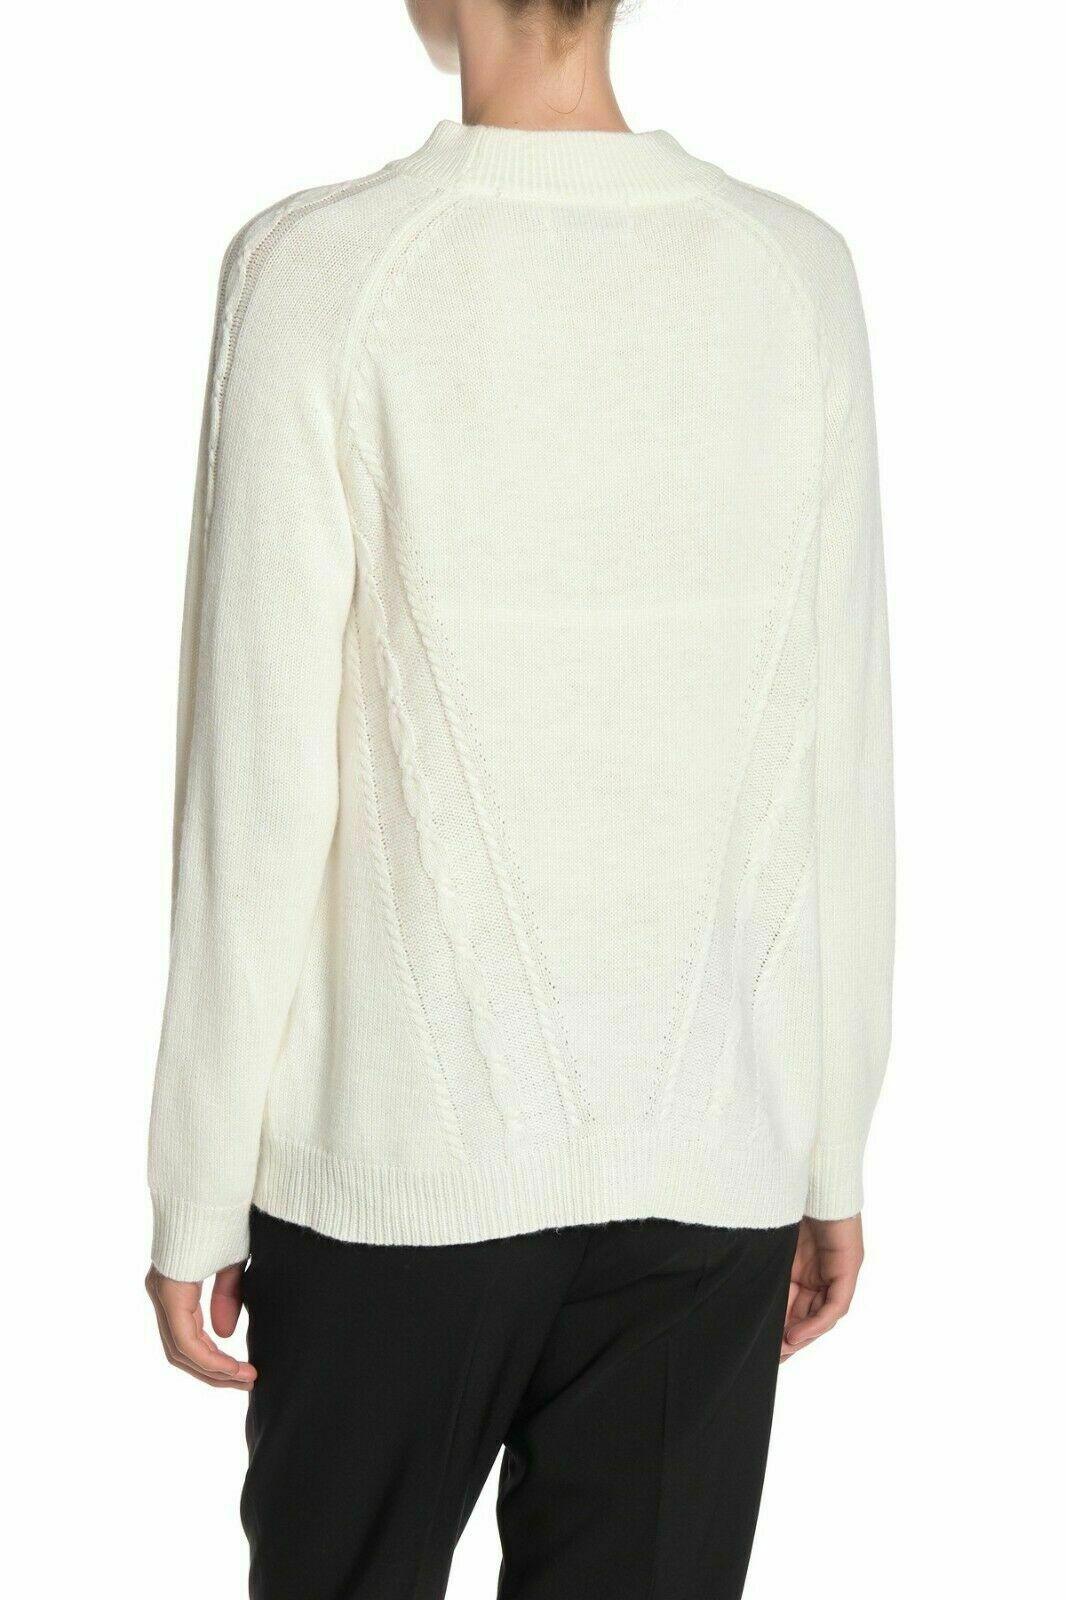 Nanette Lepore Womens Cashmere Cable Knit Sweater Cannoli Cream Size L - SVNYFancy